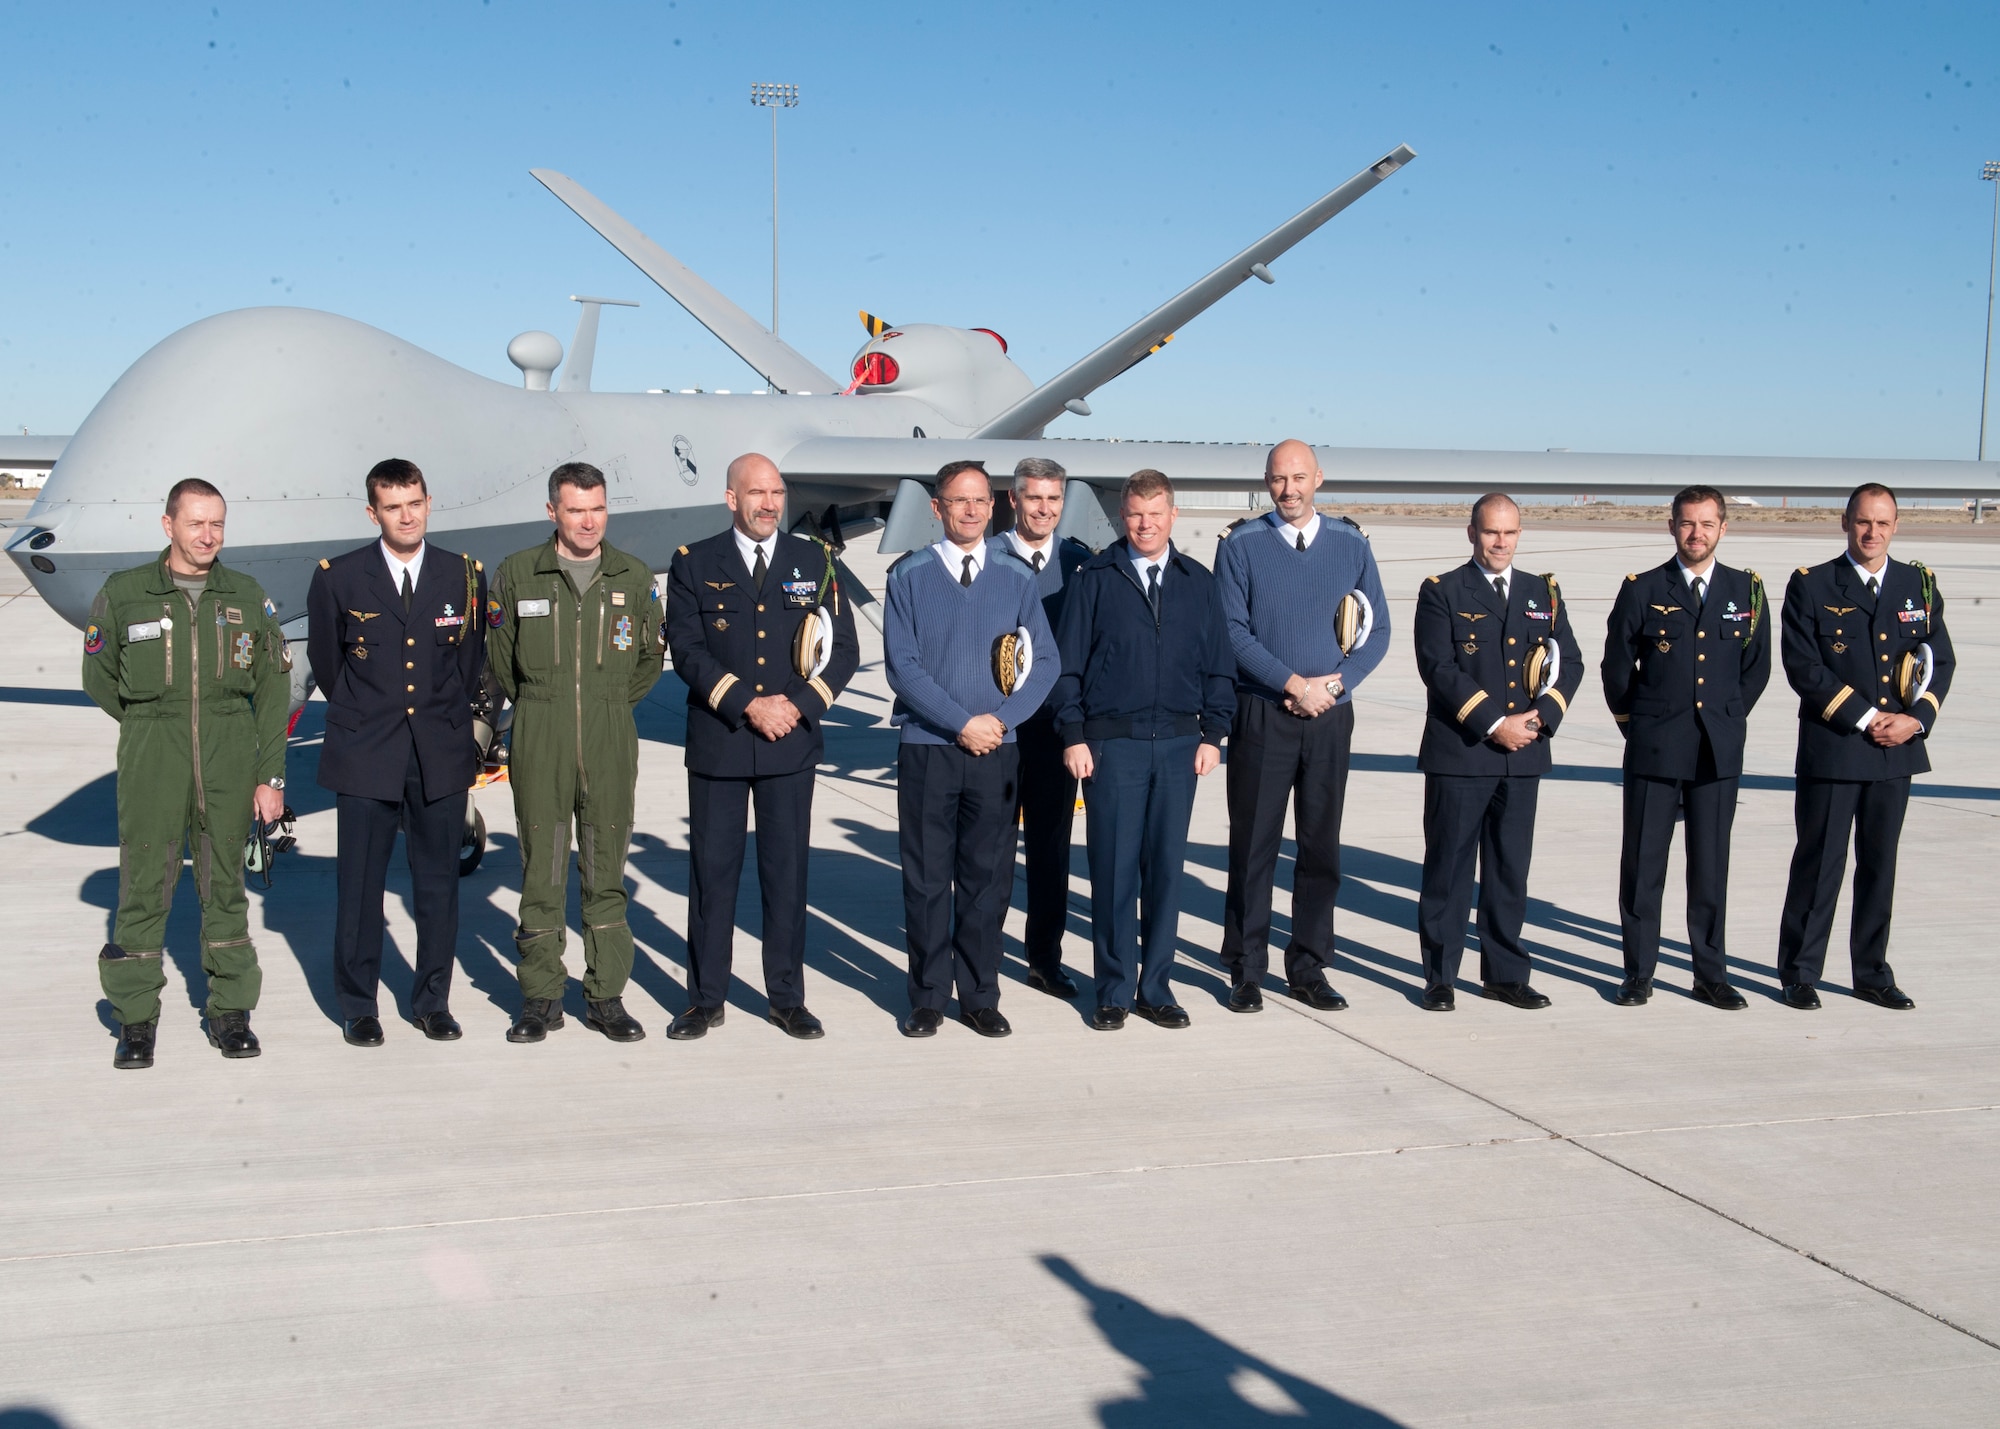 The newly- graduated French air force pilots and sensor operators stand with Colonel Andrew Croft, 49th Wing commander and Lt. Gen. Antoine Creux, French air force deputy chief of staff, in front of an MQ-9 Reaper at Holloman Air Force Base, N.M., Nov. 26. The French air force worked in collaboration with Holloman AFB to graduate six student pilots and sensor operators from the 16th Training Squadron.  The students became the first-ever French air force members to learn the MQ-9 Reaper system, and their landmark graduation will mark the beginning of future coalition efforts between France and the U.S. to better utilize Remotely Piloted Aircraft across the world. Creux visited Holloman AFB both to take part in the graduation ceremony, and to tour Holloman AFB’s MQ-9 training facilities. (U.S. Air Force phot by Airman 1st Class Daniel E. Liddicoet/Released)

